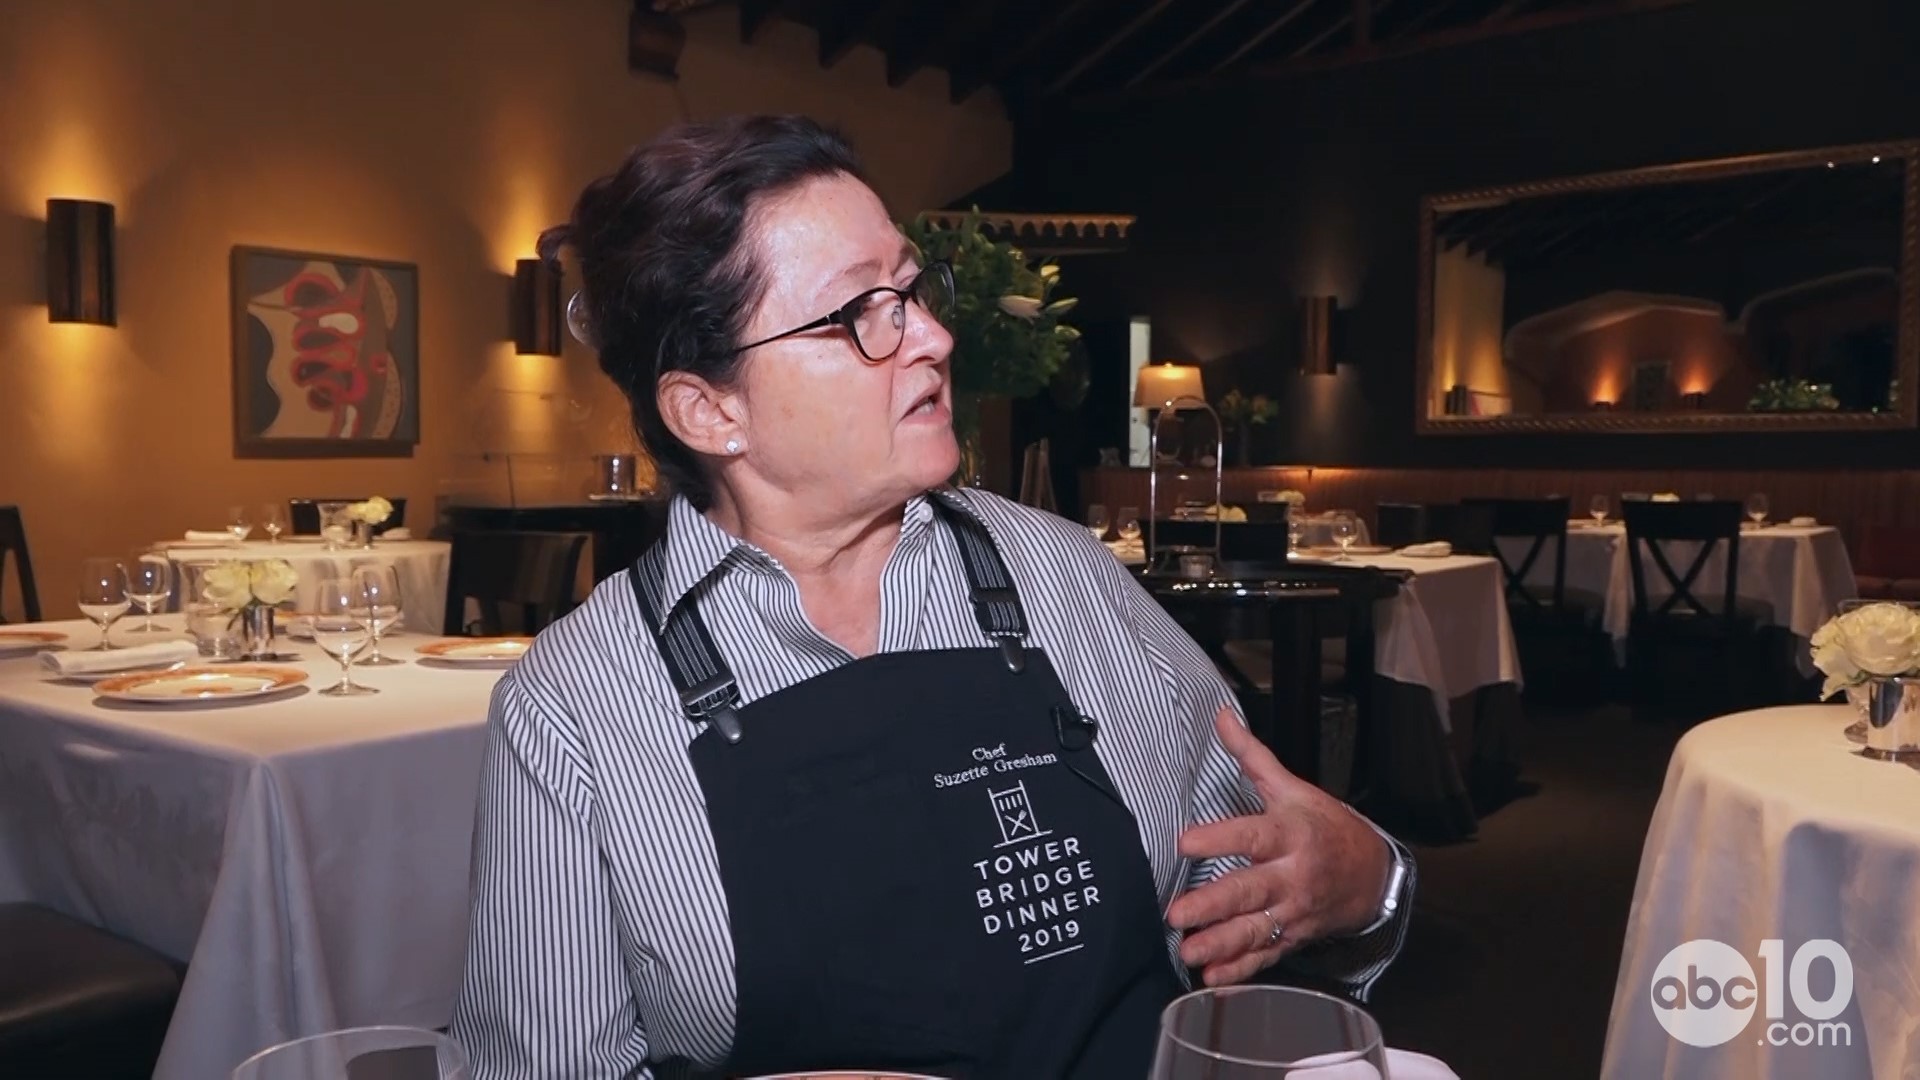 Suzette Gresham of 'Acquerello' restaurant in San Francisco talks with Mark S. Allen about serving as the lead chef for the Tower Bridge Dinner 2019 in Sacramento.